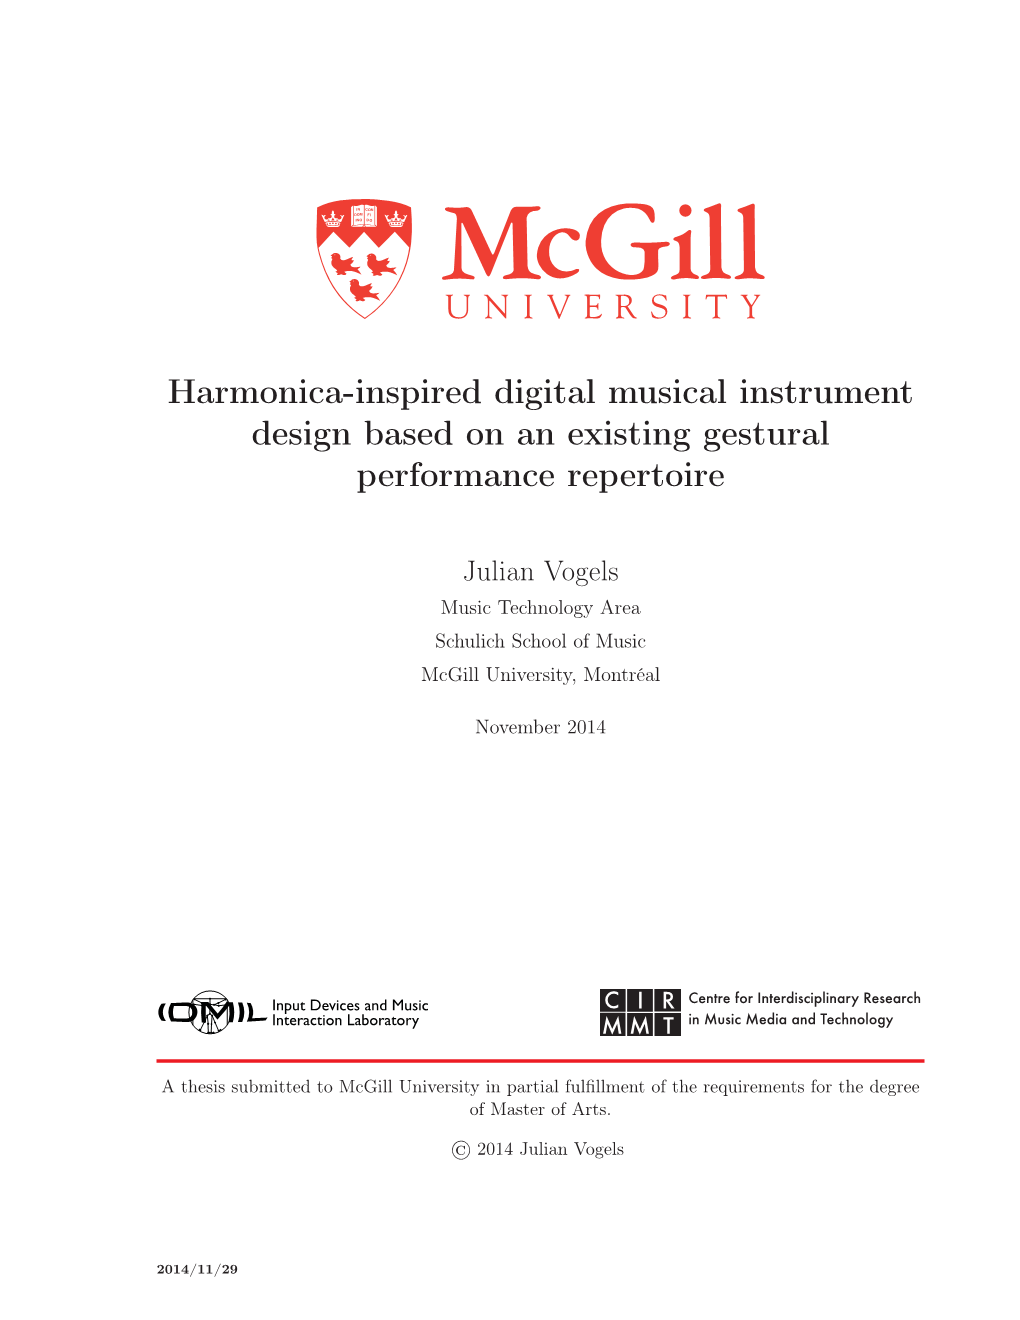 Harmonica-Inspired Digital Musical Instrument Design Based on an Existing Gestural Performance Repertoire